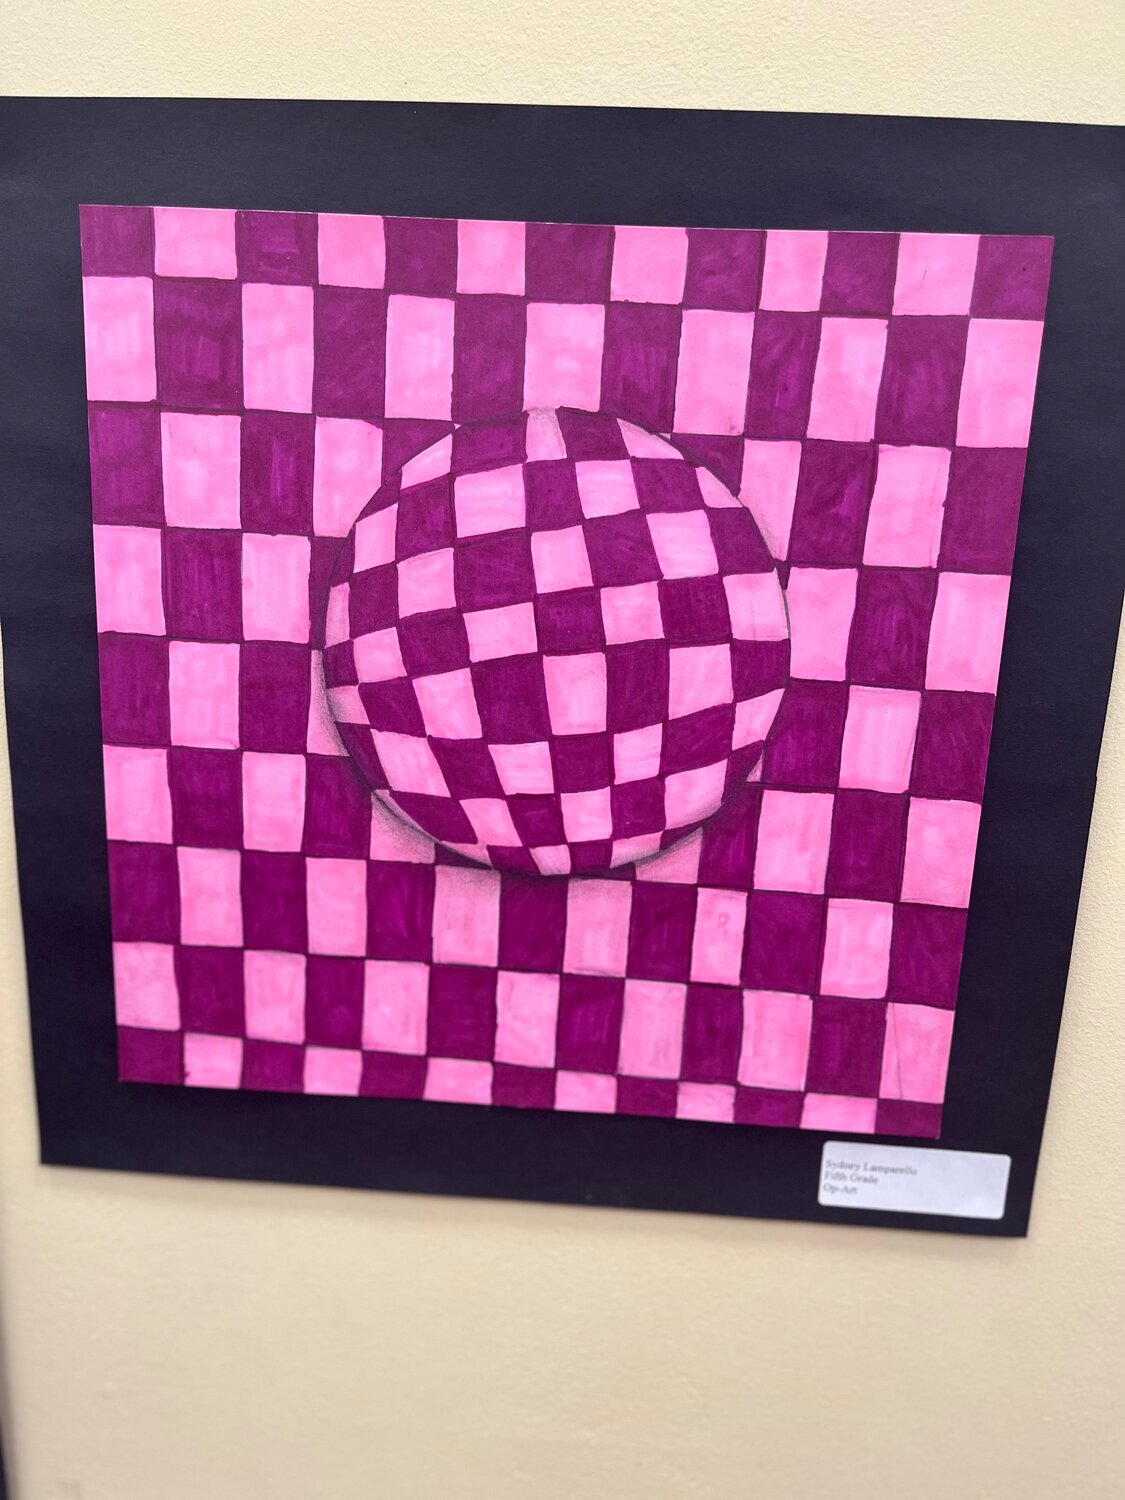 Fifth grader Sydney Lamparello designed this op-art piece, which is currently on display in the children’s section of the library.